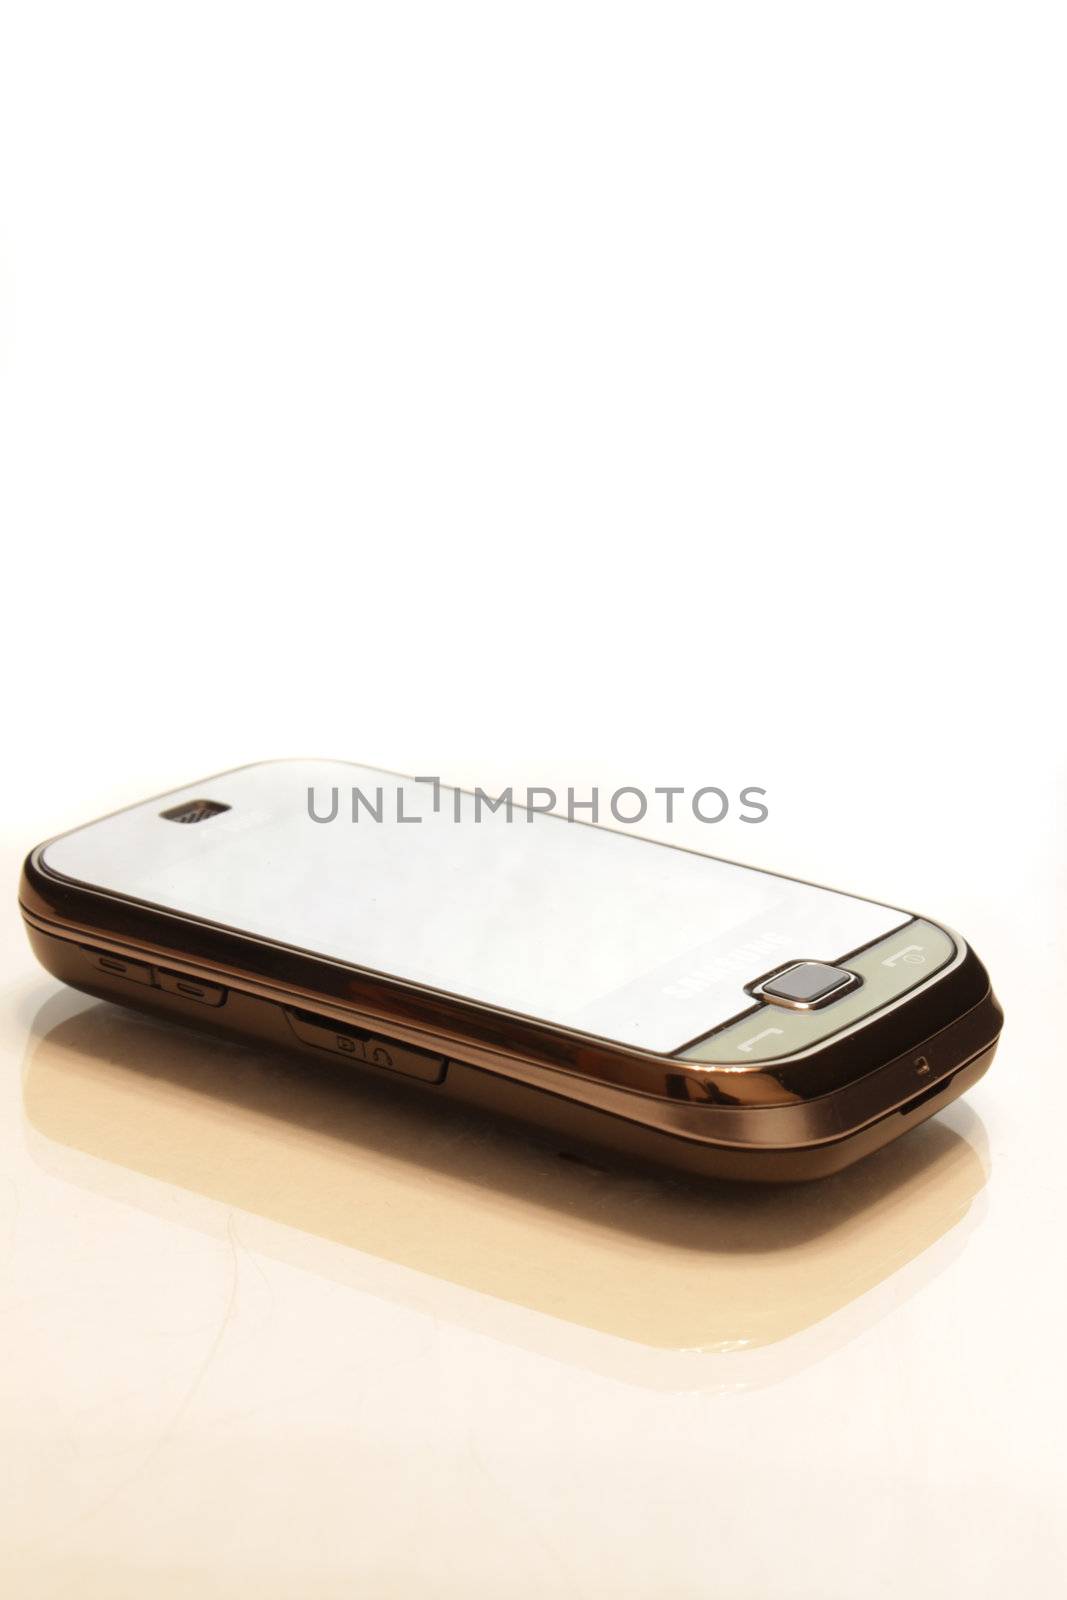 a mobile telephone on the white background